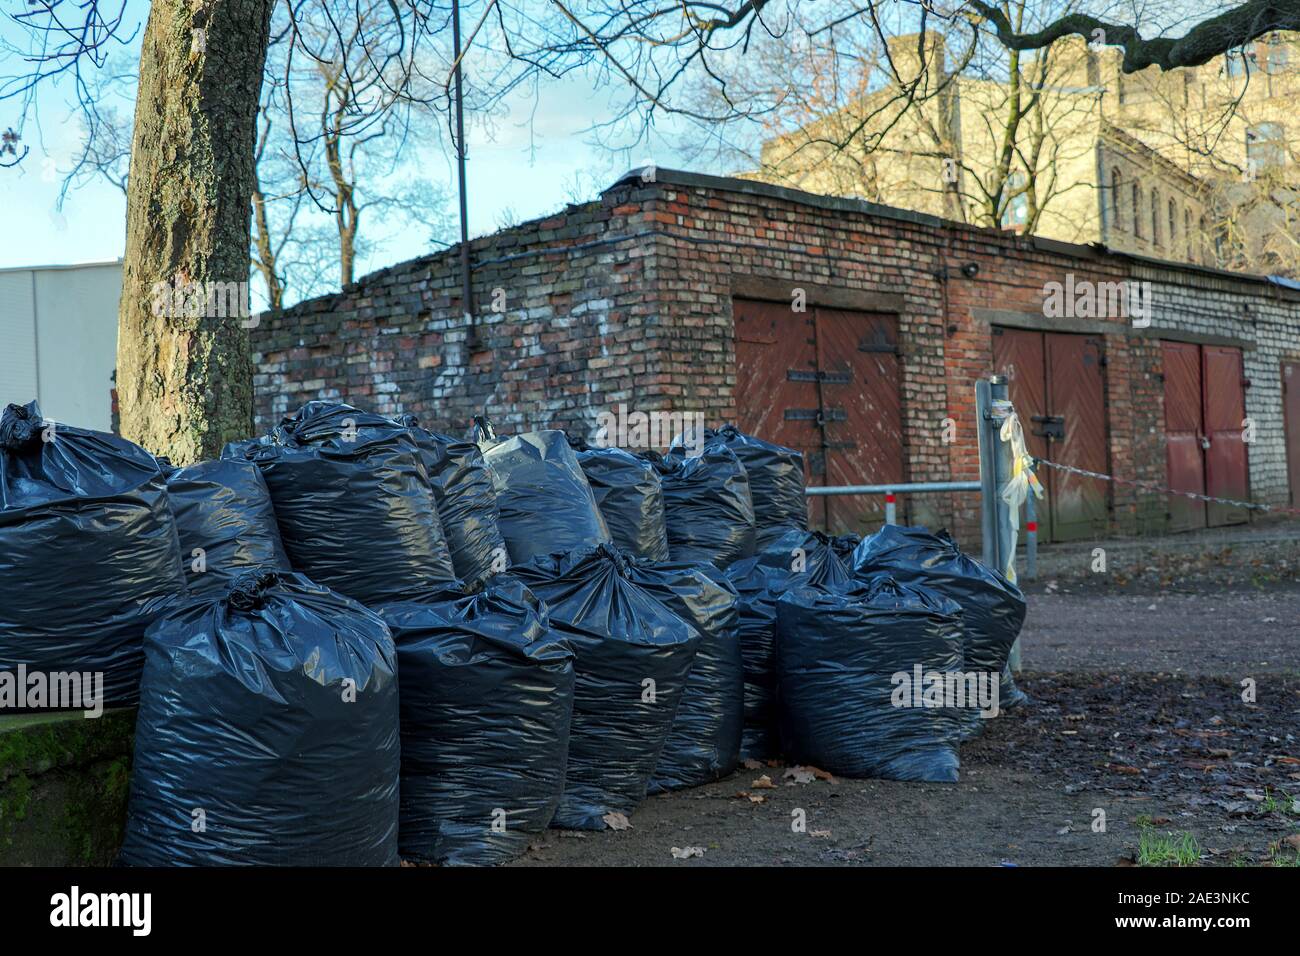 https://c8.alamy.com/comp/2AE3NKC/big-pile-of-black-plastic-garbage-bags-with-trash-stacked-on-the-street-trash-bags-on-the-street-at-utility-workers-strike-day-2AE3NKC.jpg